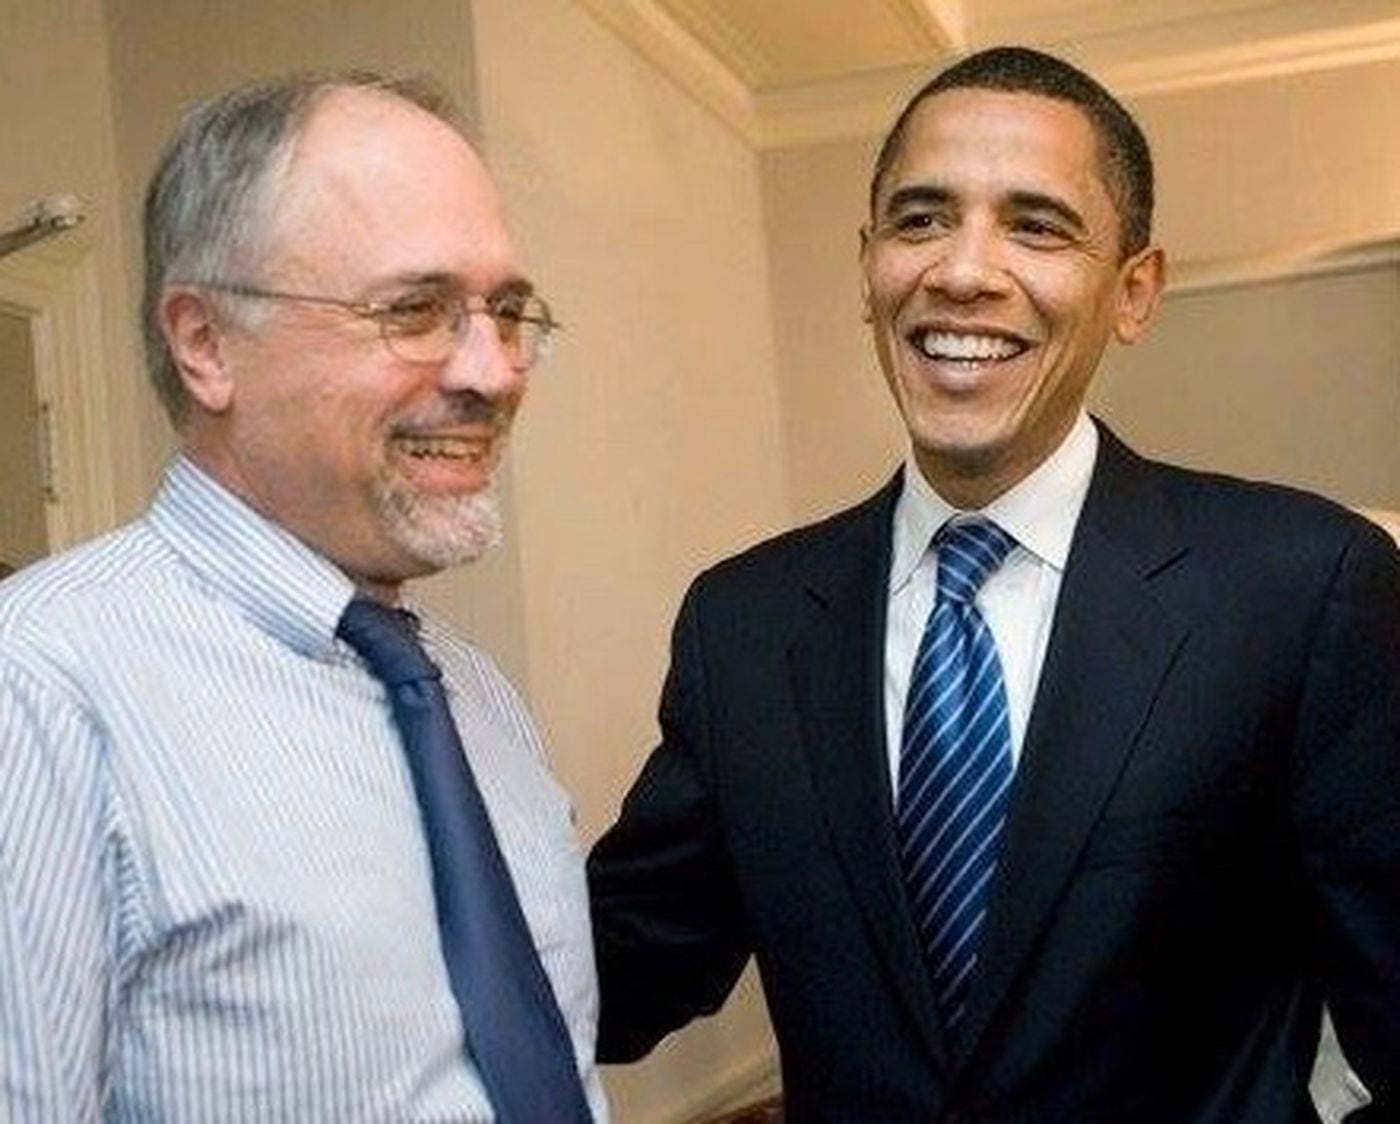 Gar Joseph with presidential candidate Barack Obama at the Philadelphia Daily News in 2008.